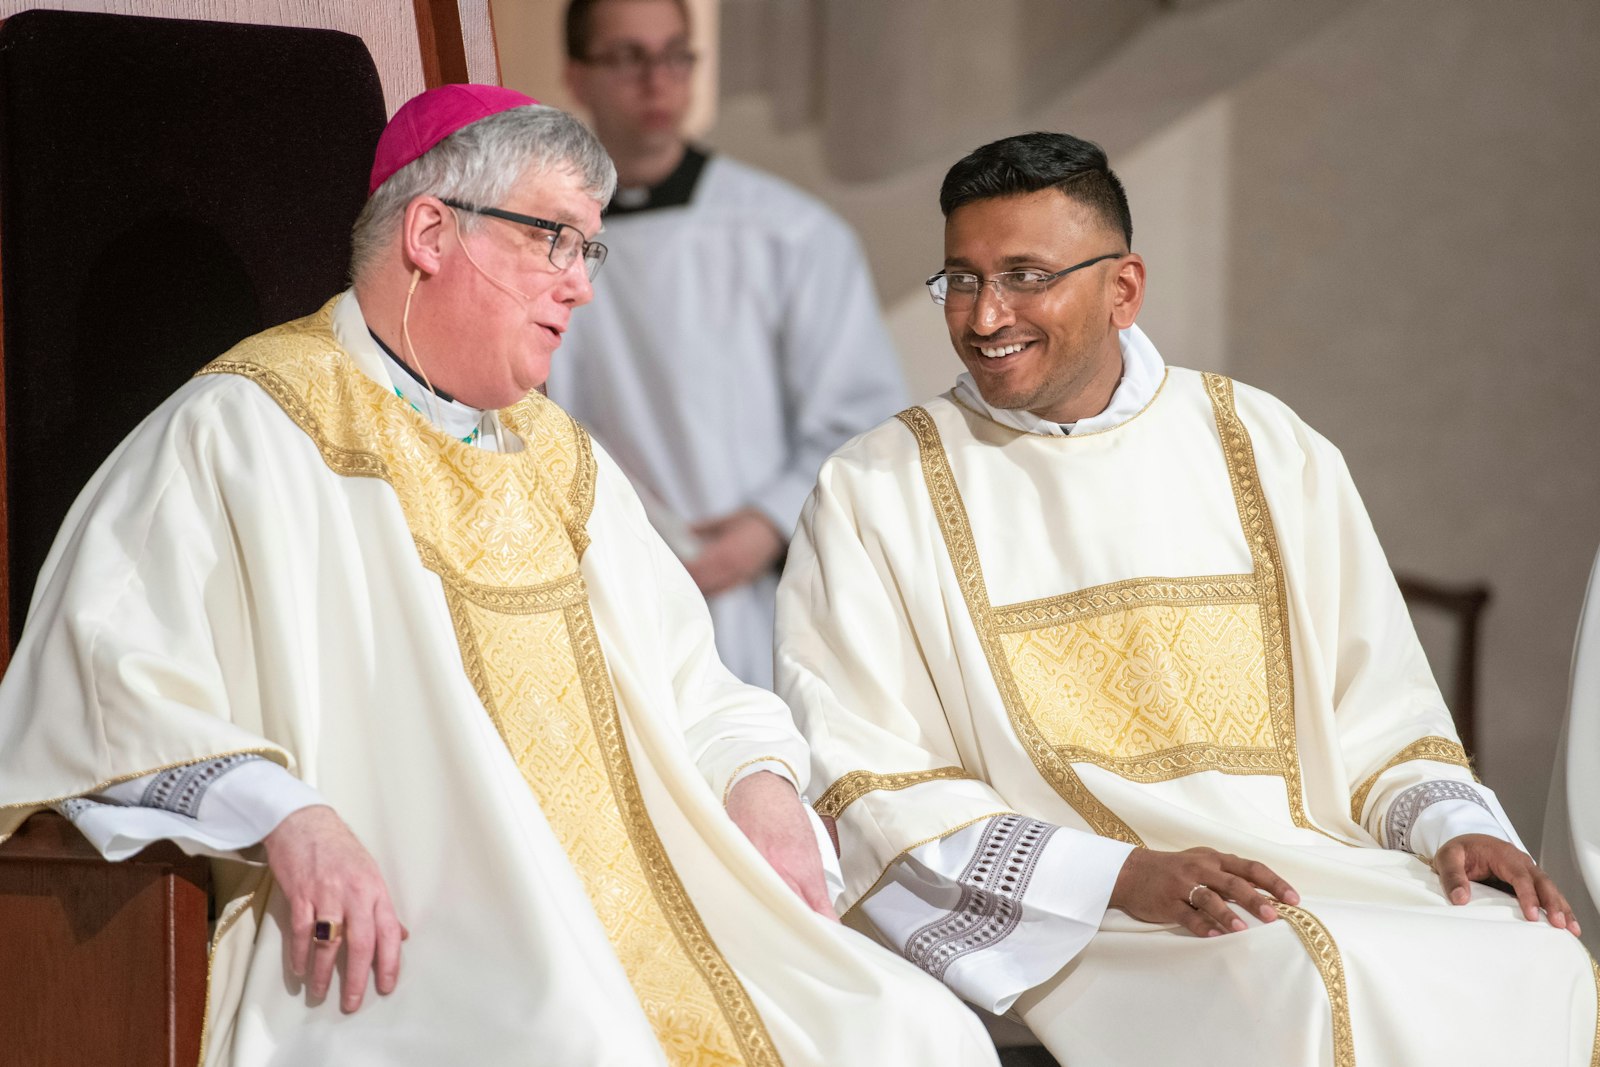 Deacon Michael Bruno Selvaraj shares a smile with Bishop Battersby during his ordination Mass. Deacon Bruno's vocation story began in his native India, where the seminary was too full to admit him as a young man. It wasn't until he moved to Michigan in 2014 that he rediscovered his calling.